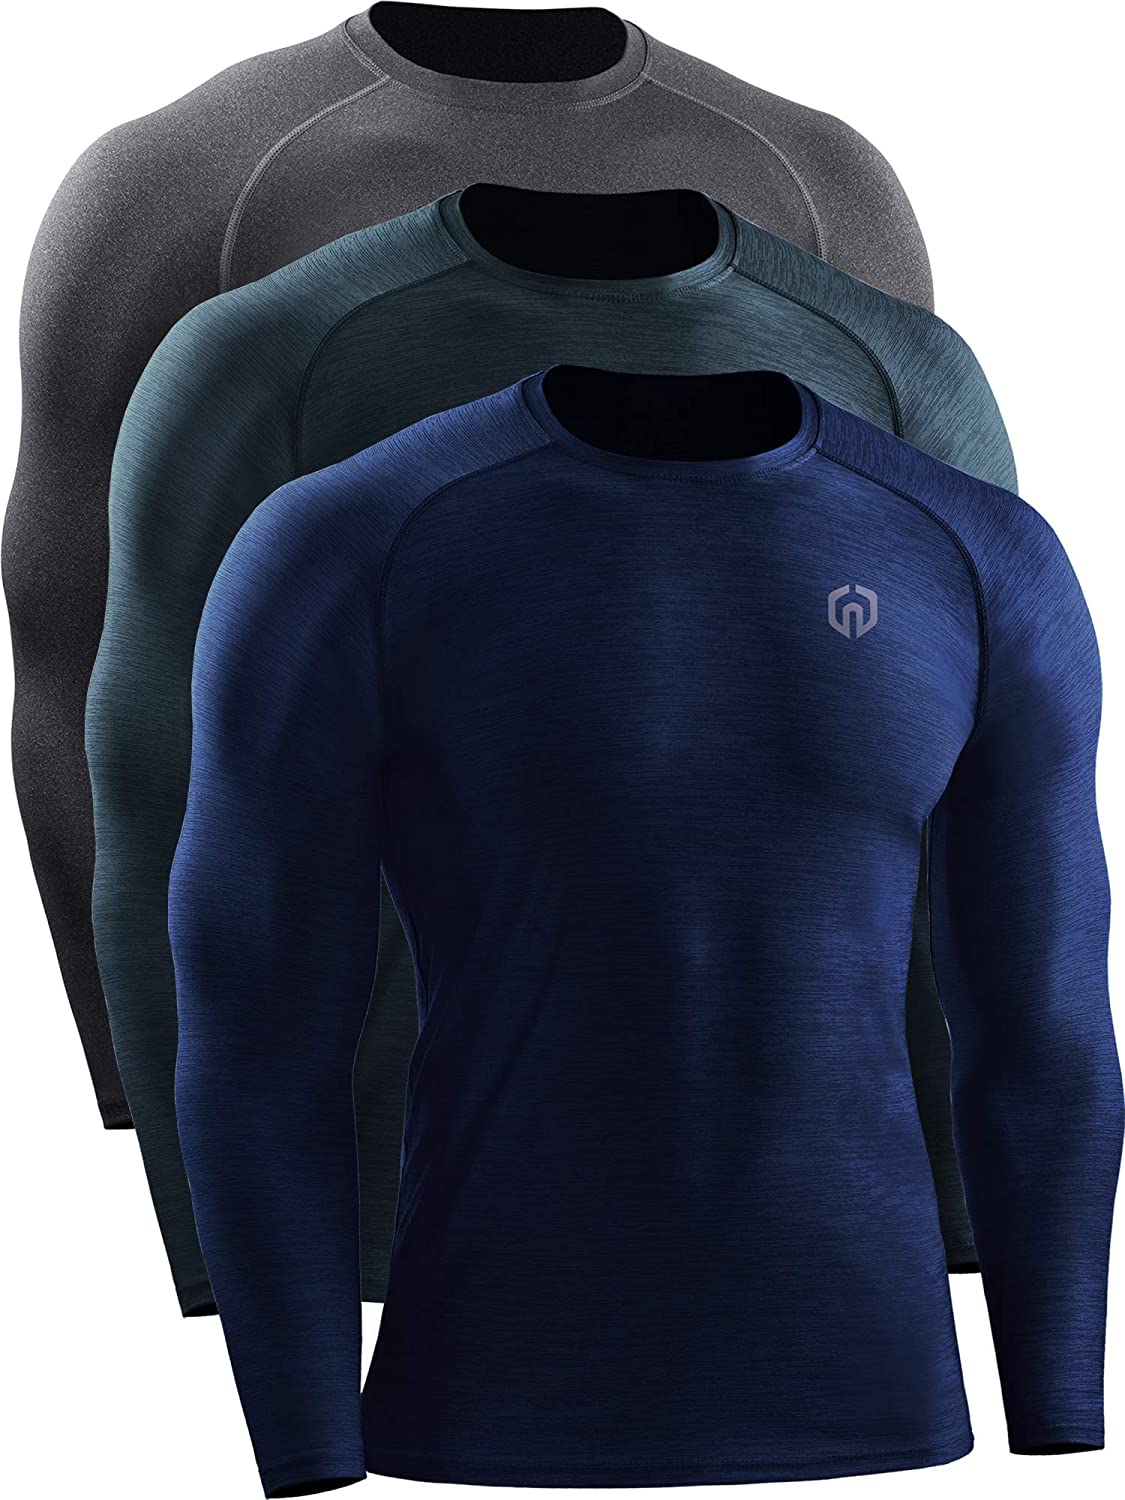 Neleus Men's Dry Fit Athletic Workout Running Shirts Long Sleeve 